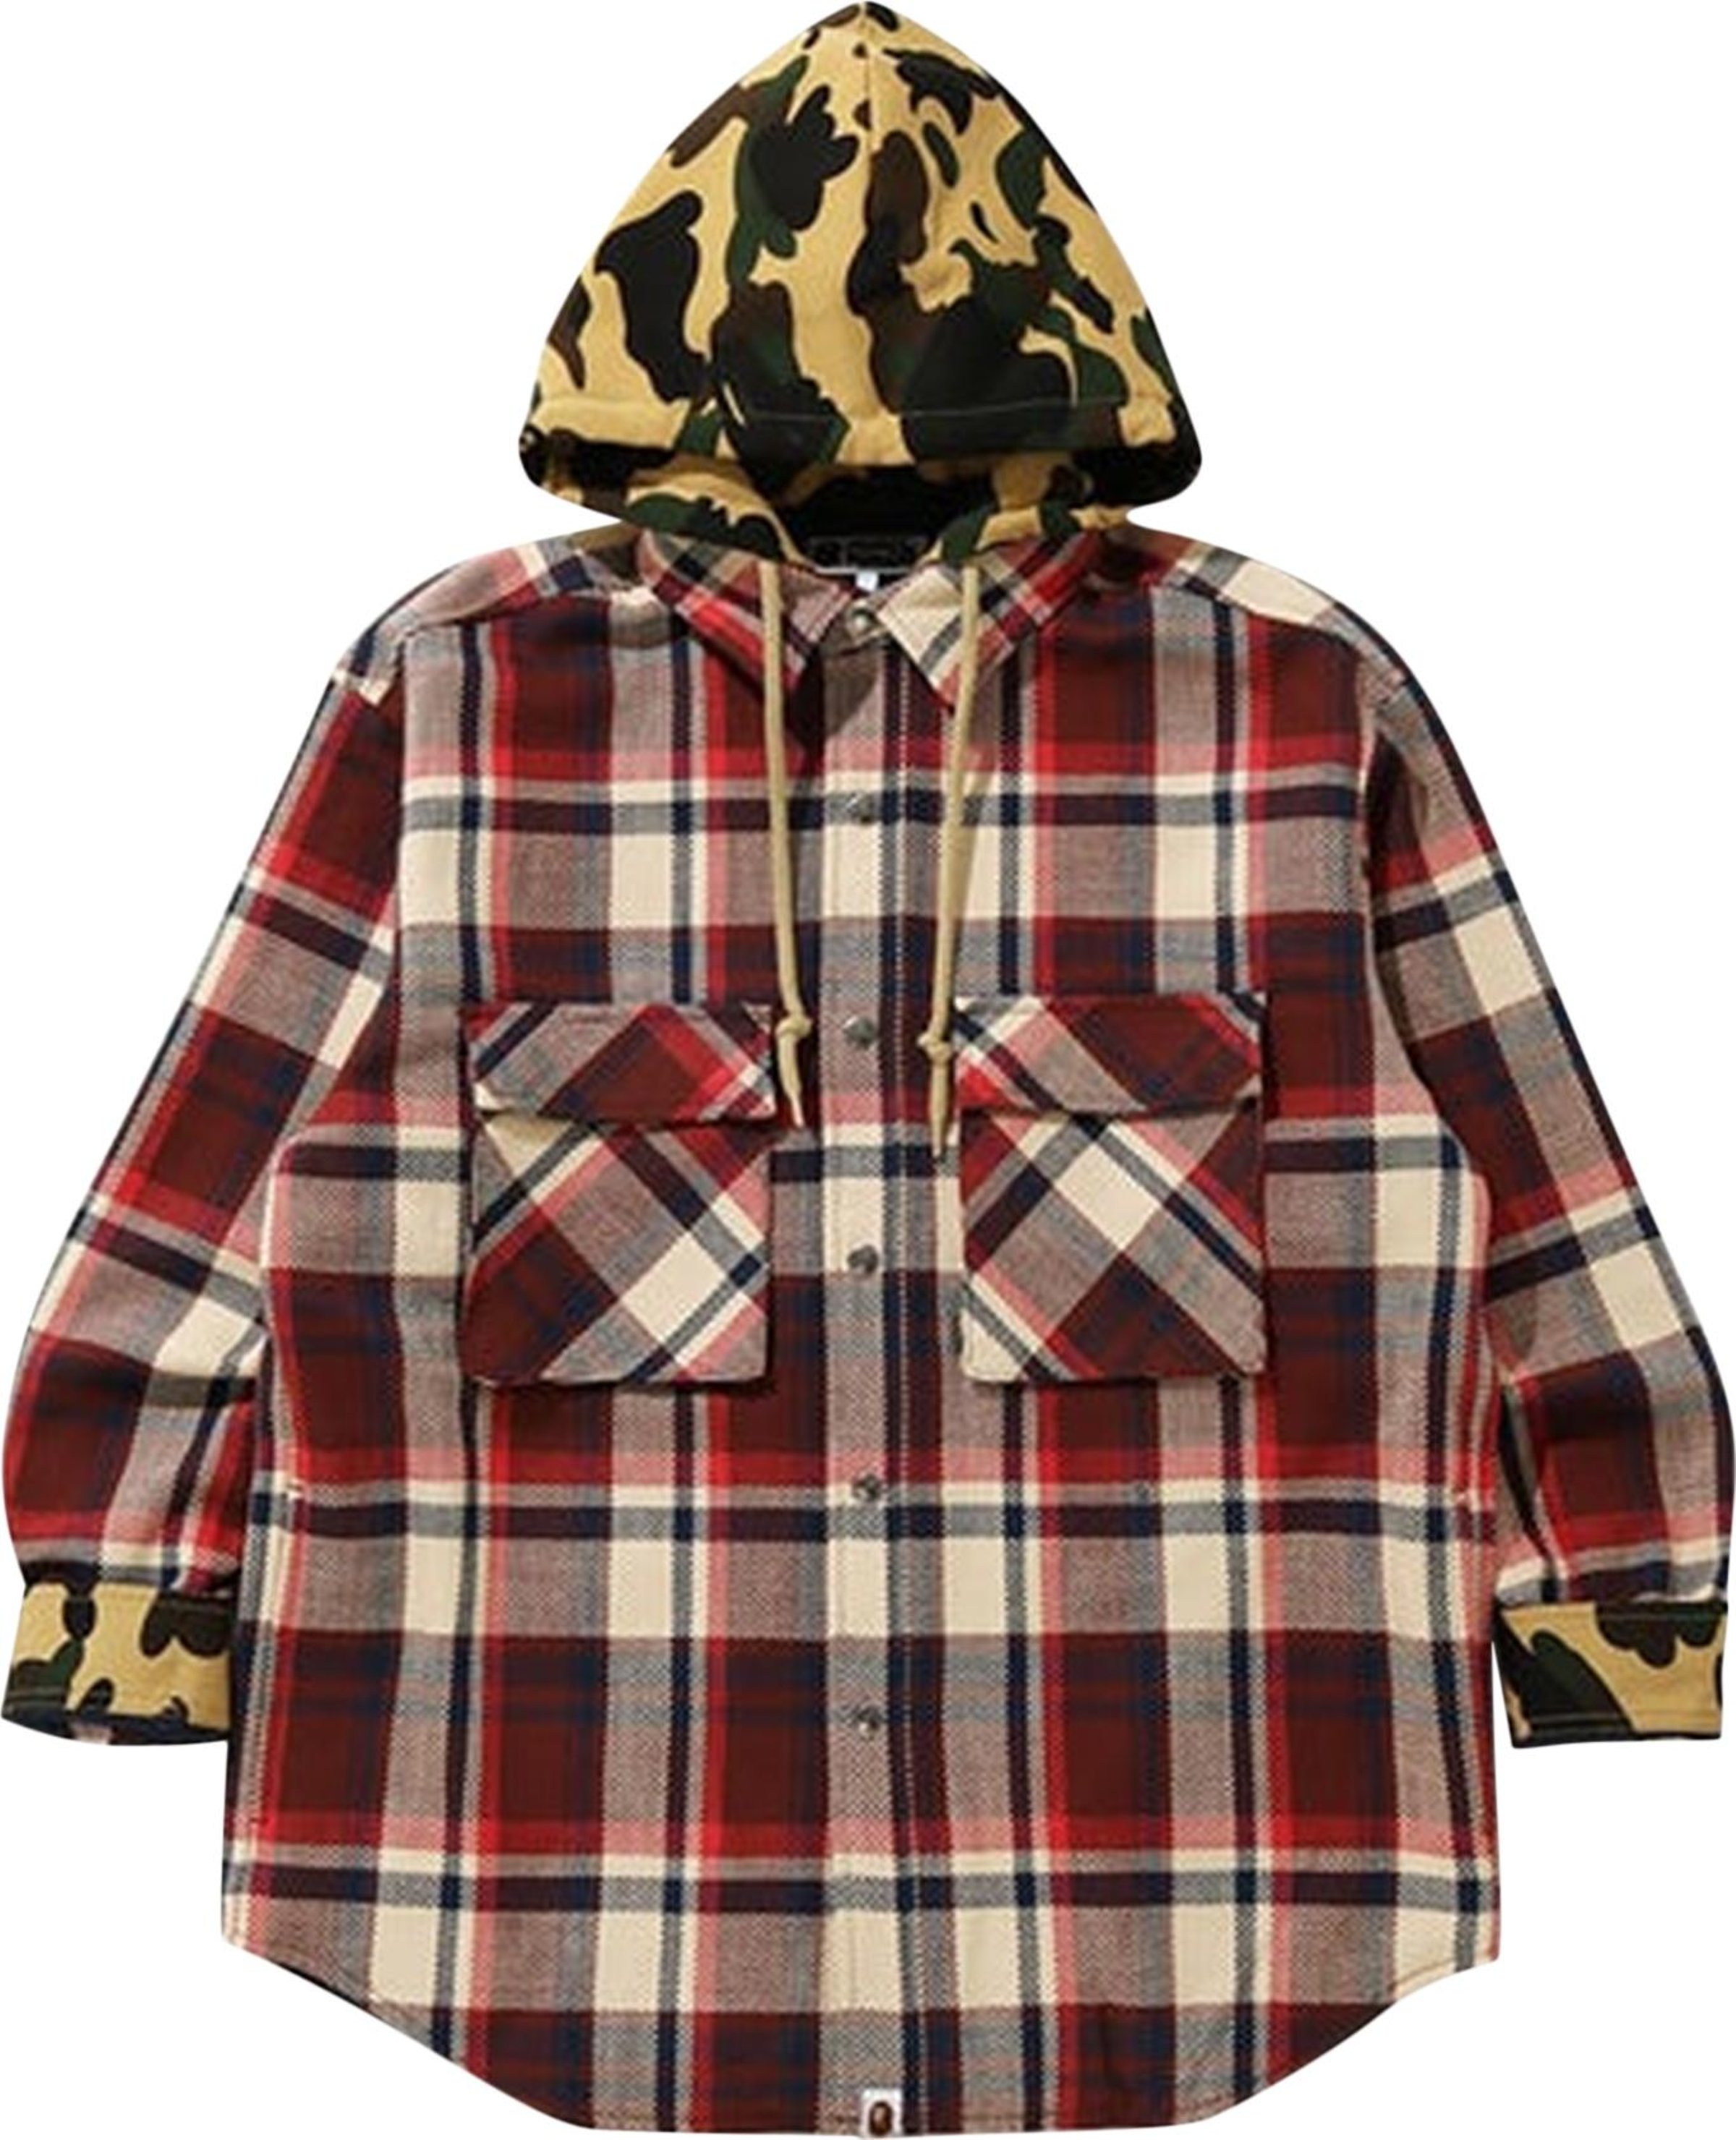 Buy BAPE Check Hoodie Jacket 'Red' - 1G70 140 005 RED | GOAT